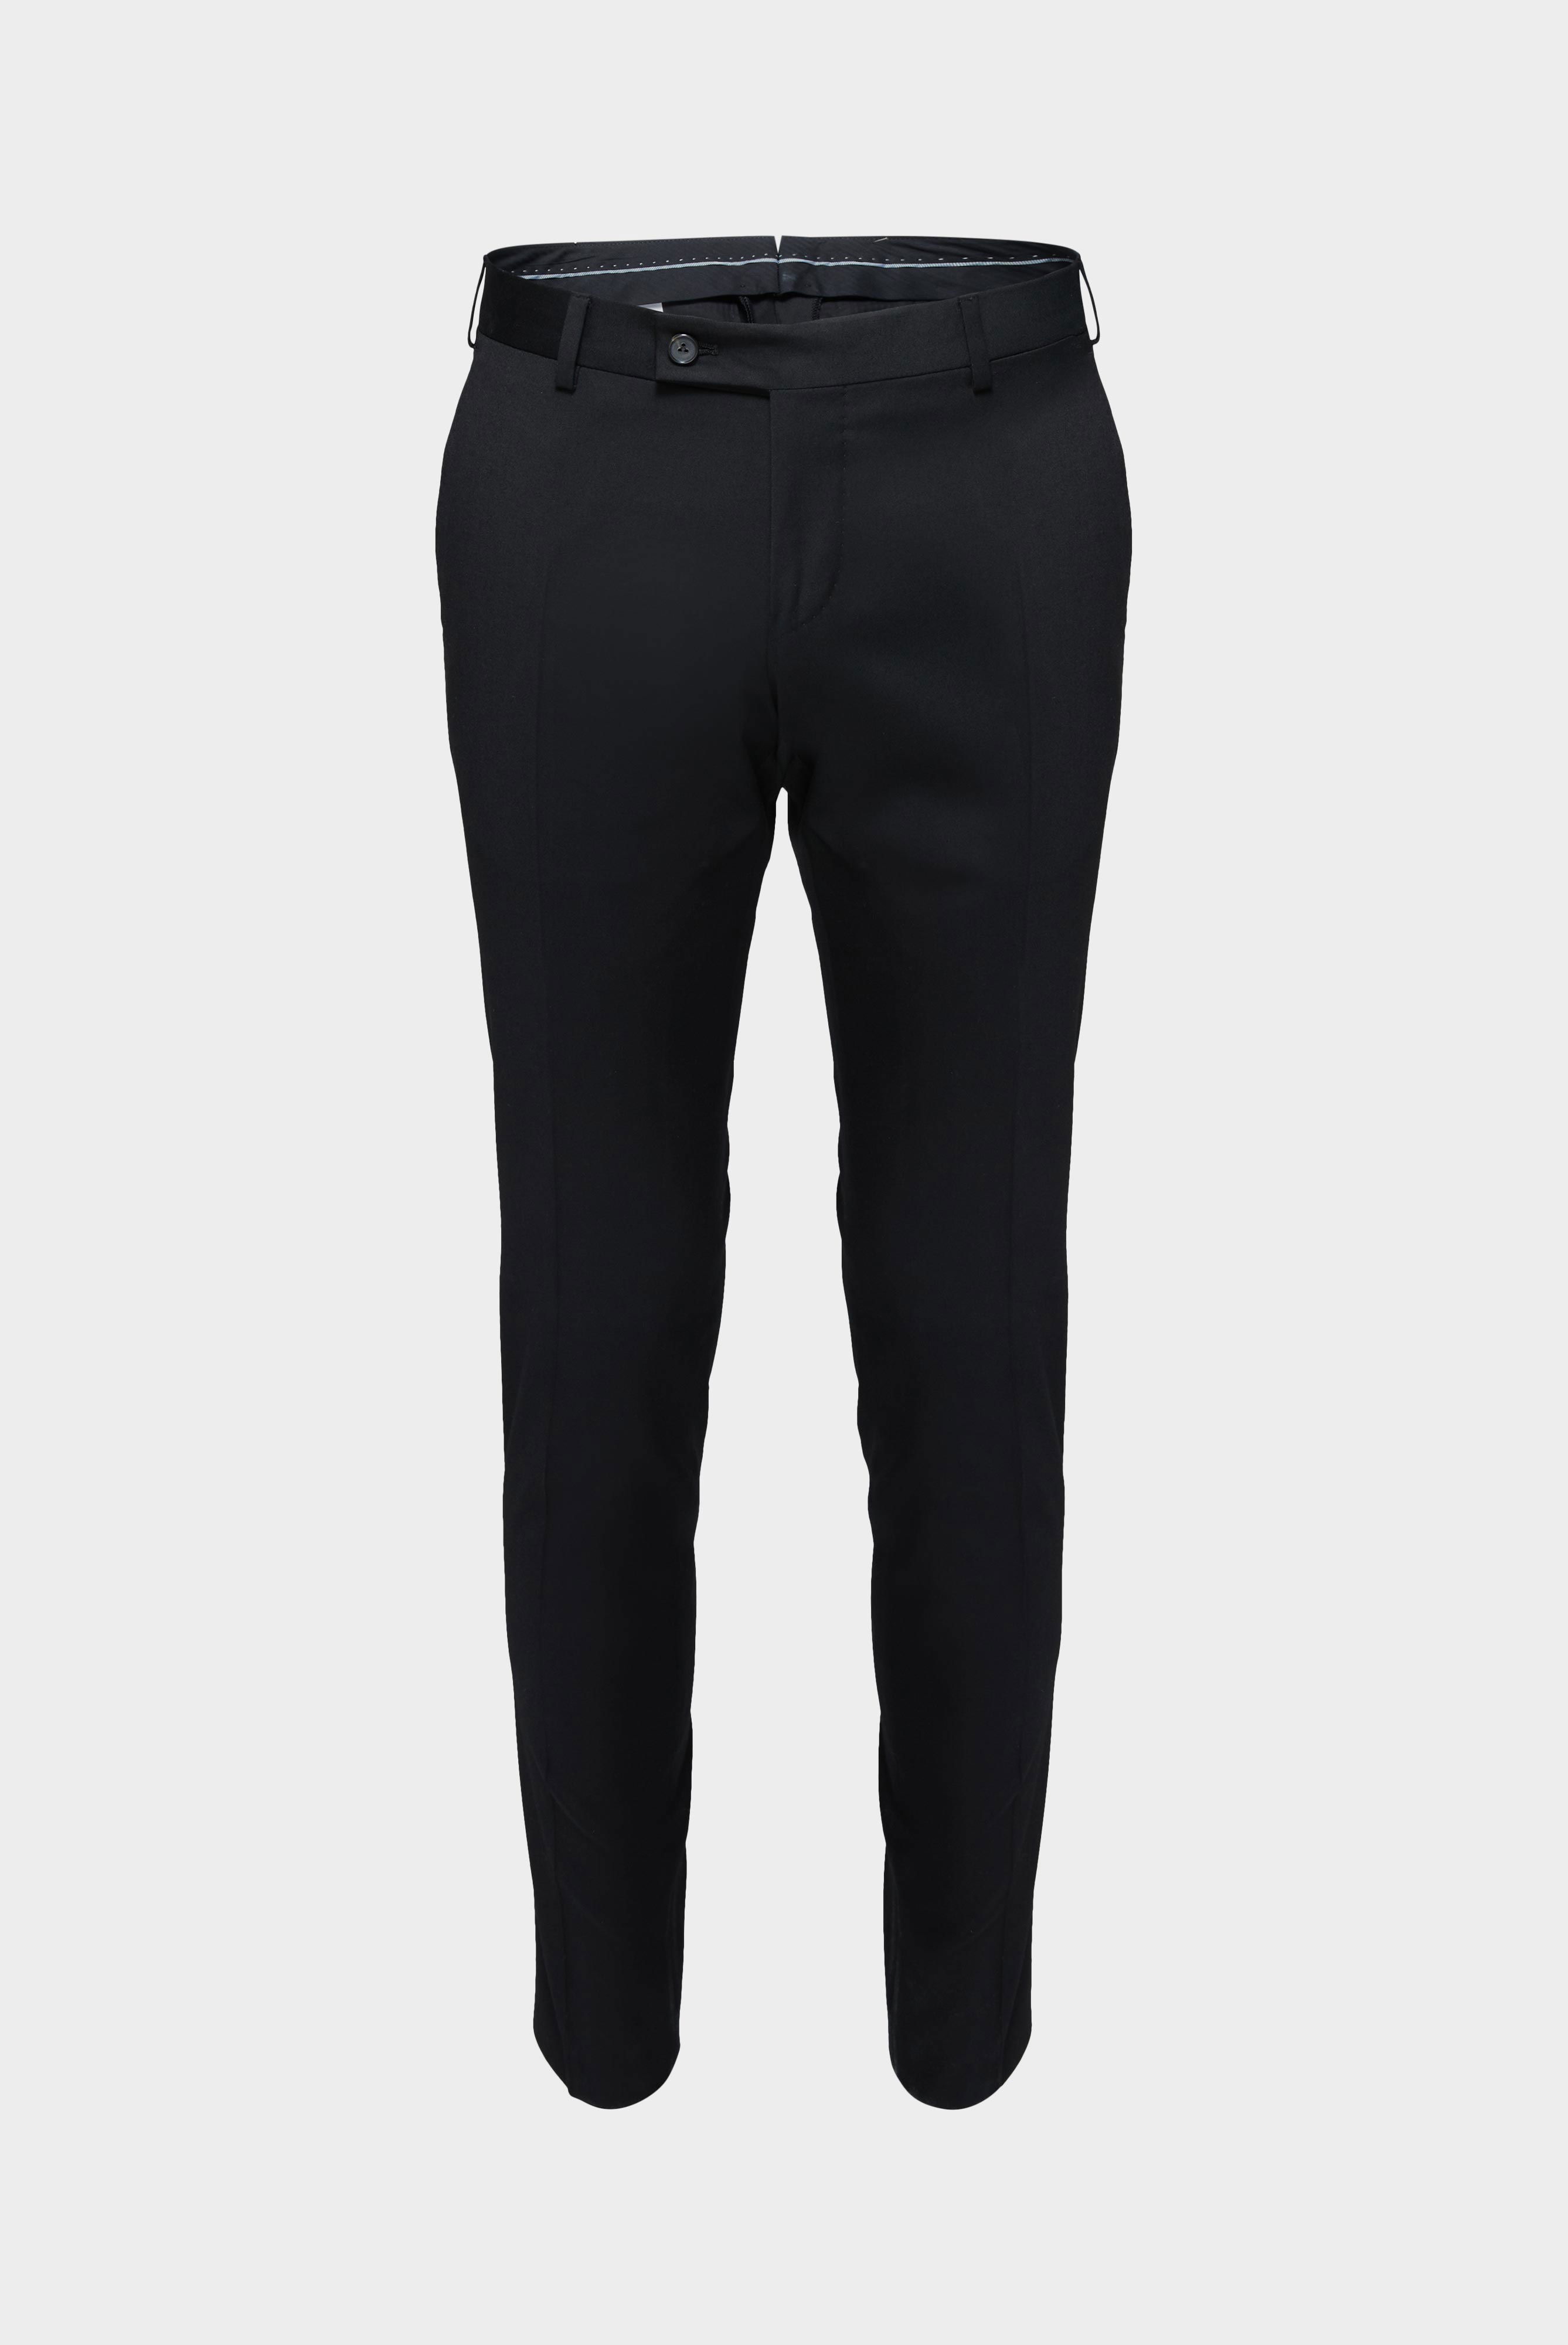 Jeans & Trousers+Wool Trousers Slim Fit+20.7880.16.H01010.099.46